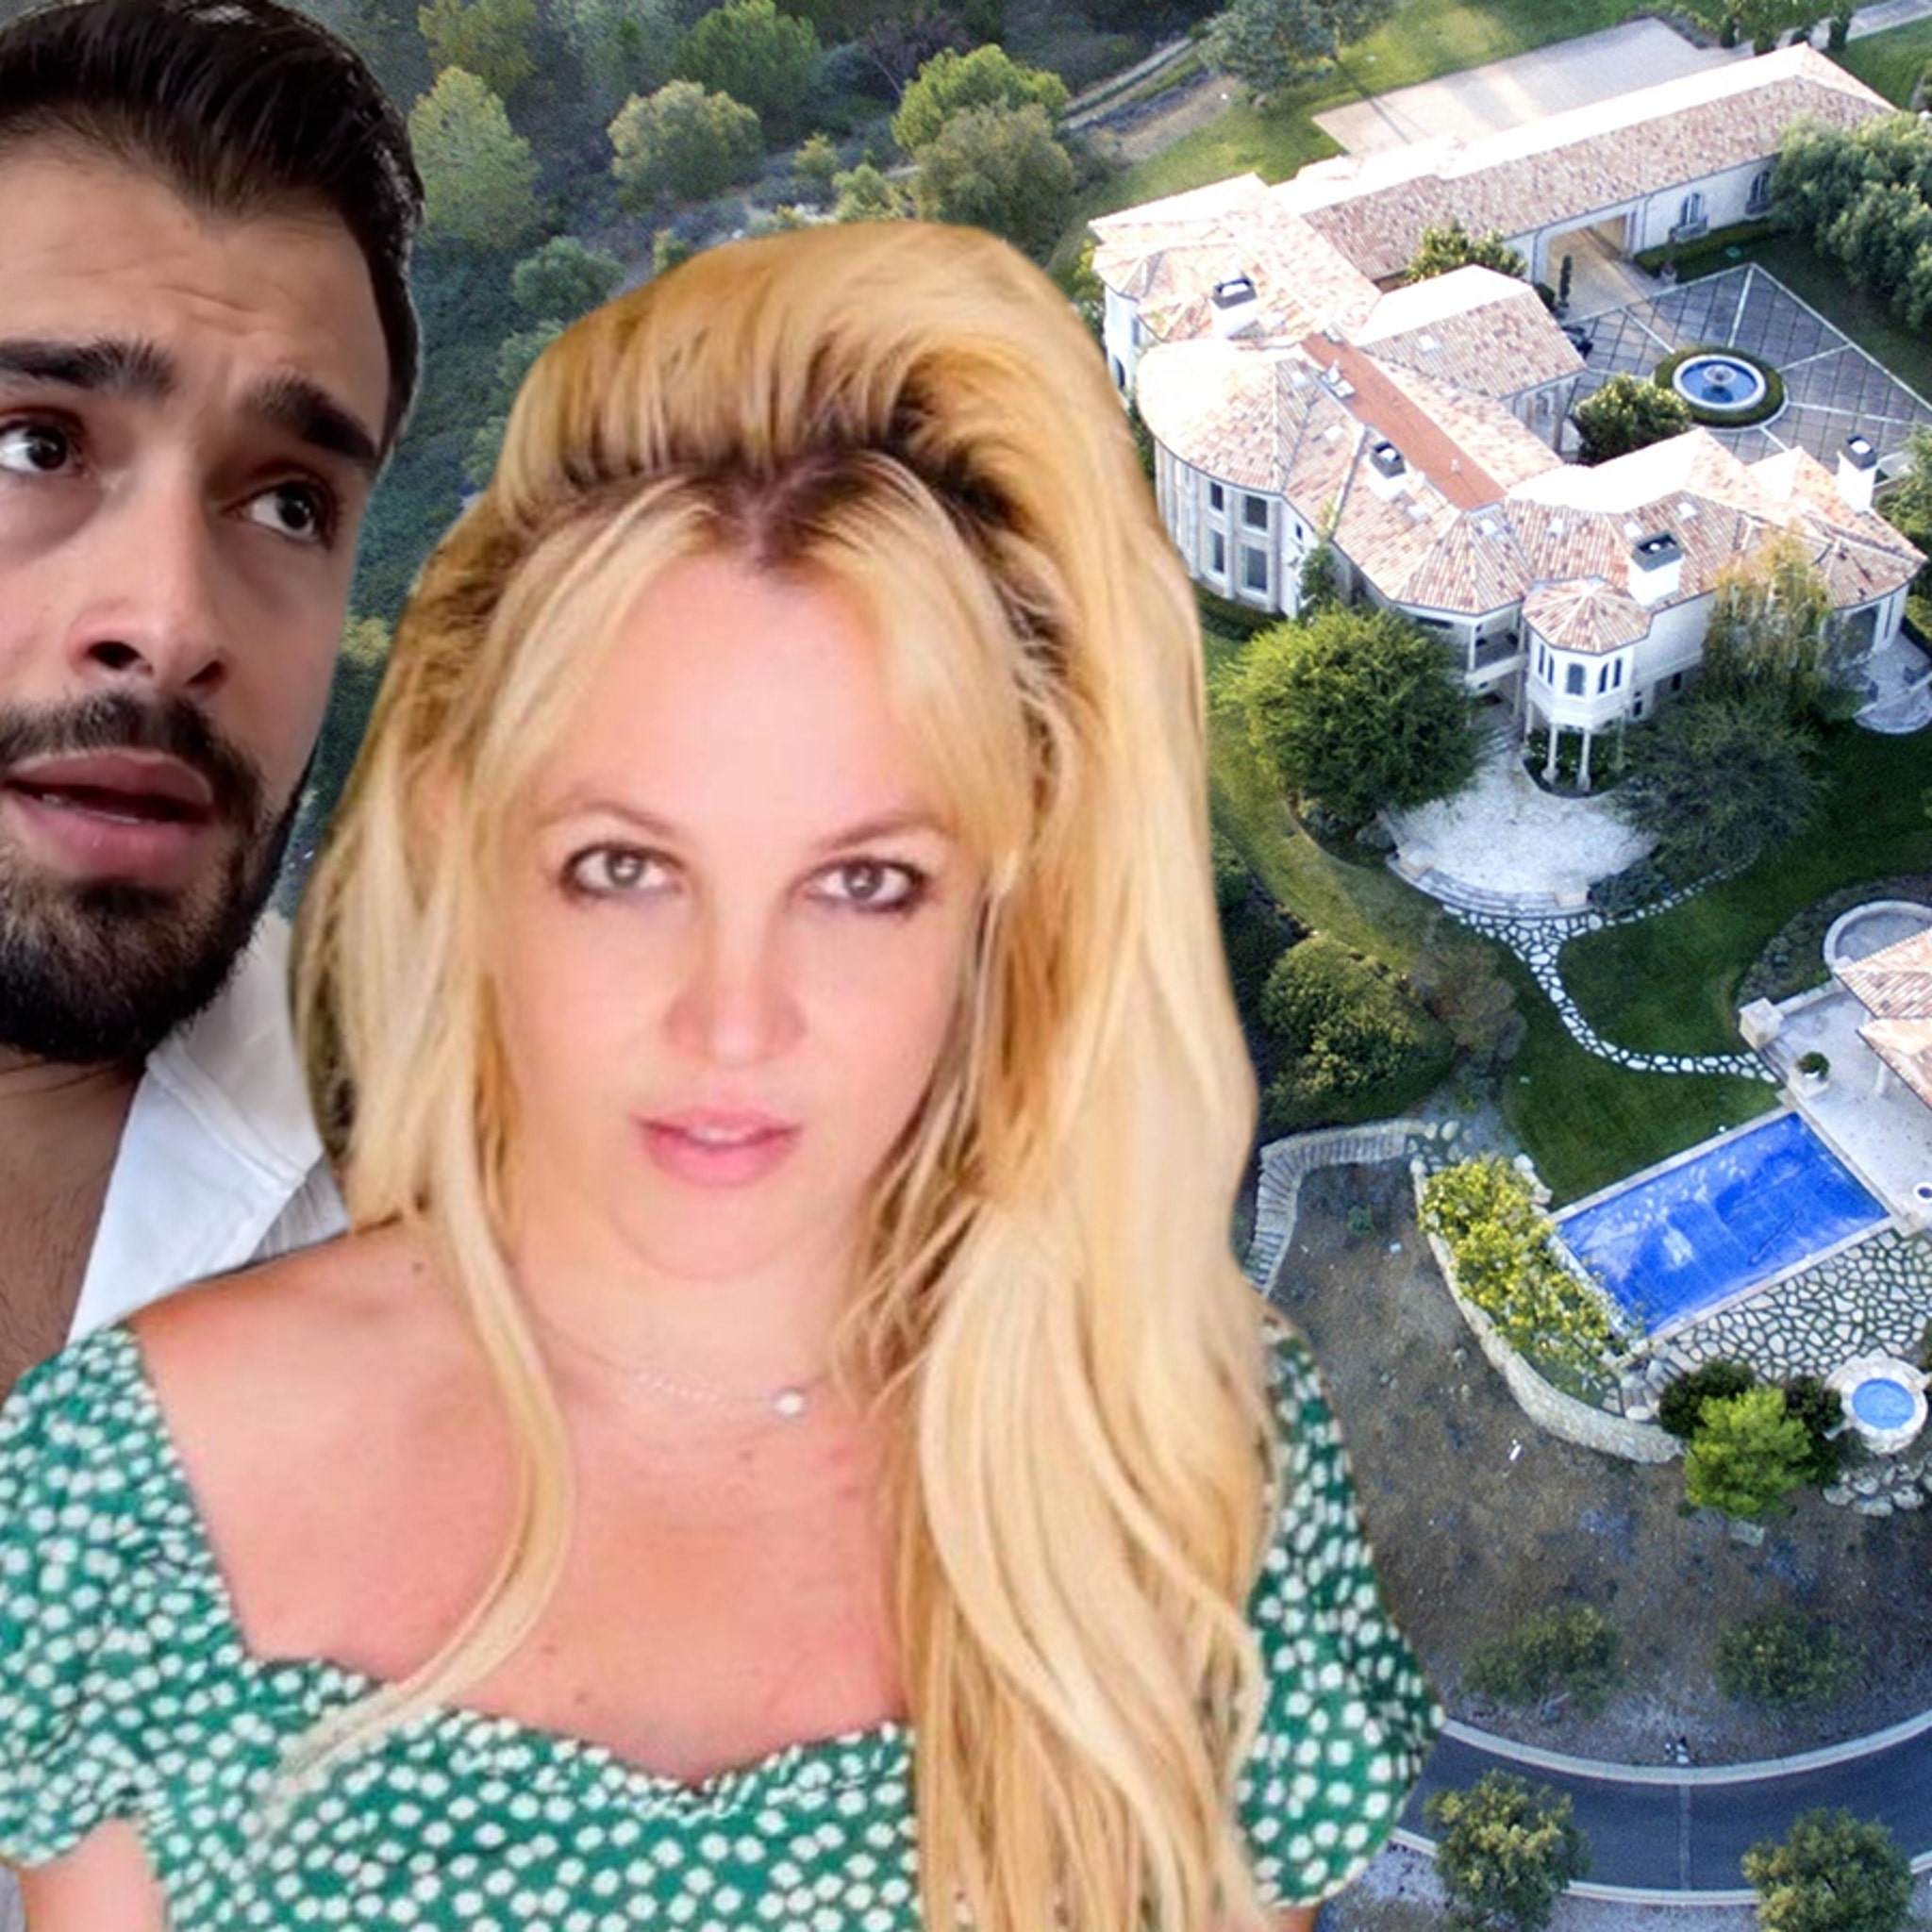 Britney Spears Full Porn Tape - Sam Asghari Believes Britney Spears was Cheating with House Staff Member